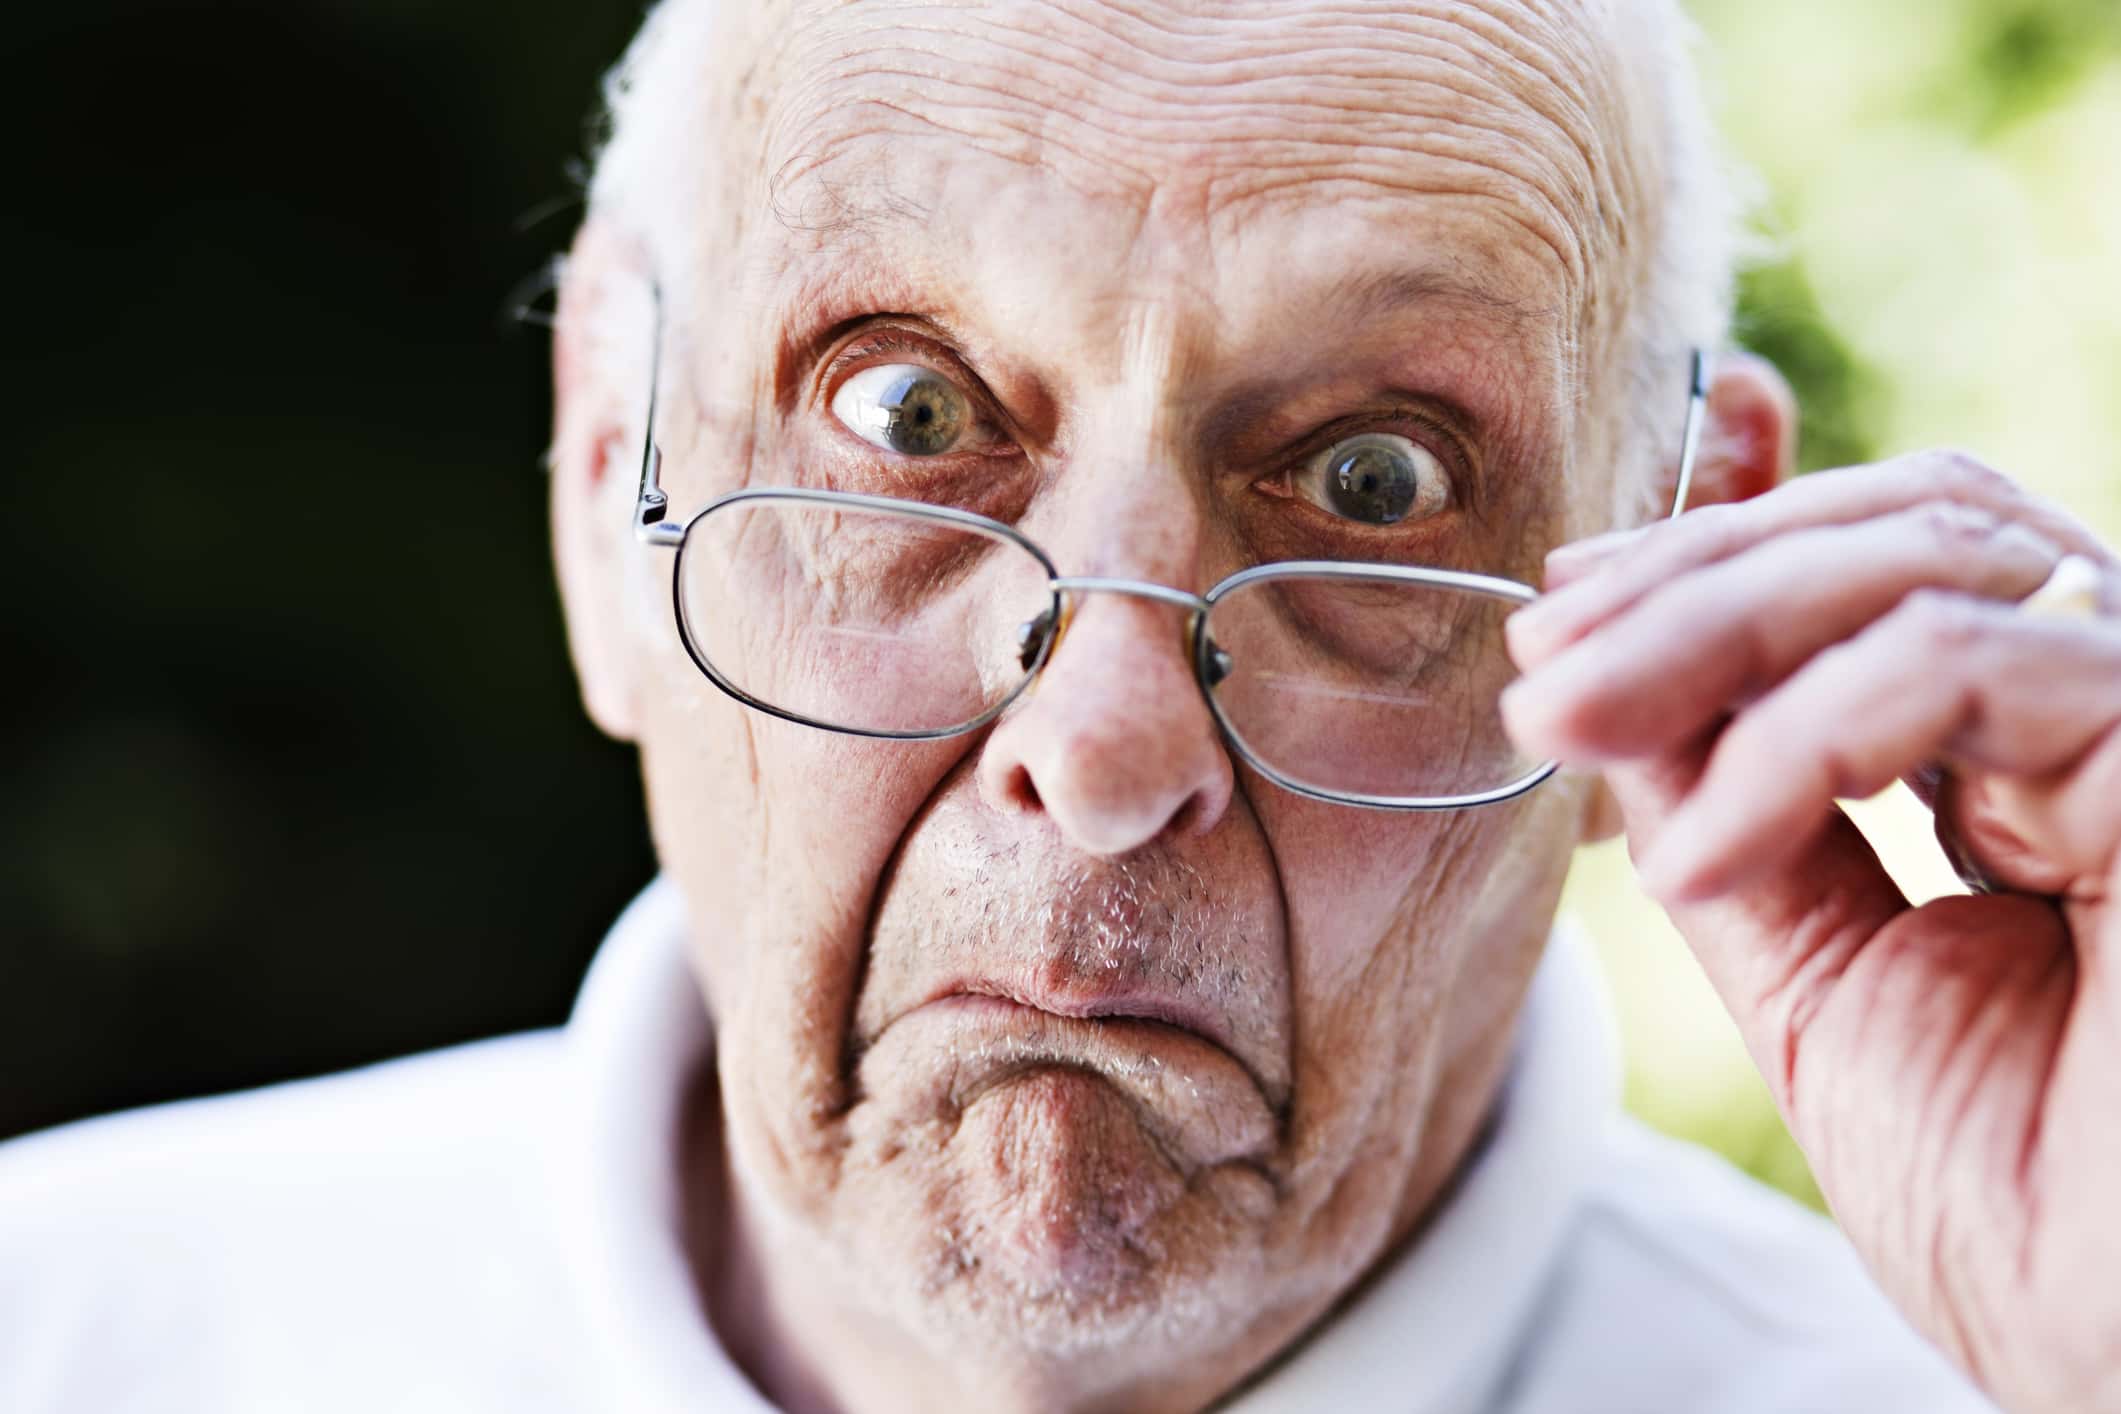 Grumpy old man looks over spectacles, shocked and disapproving